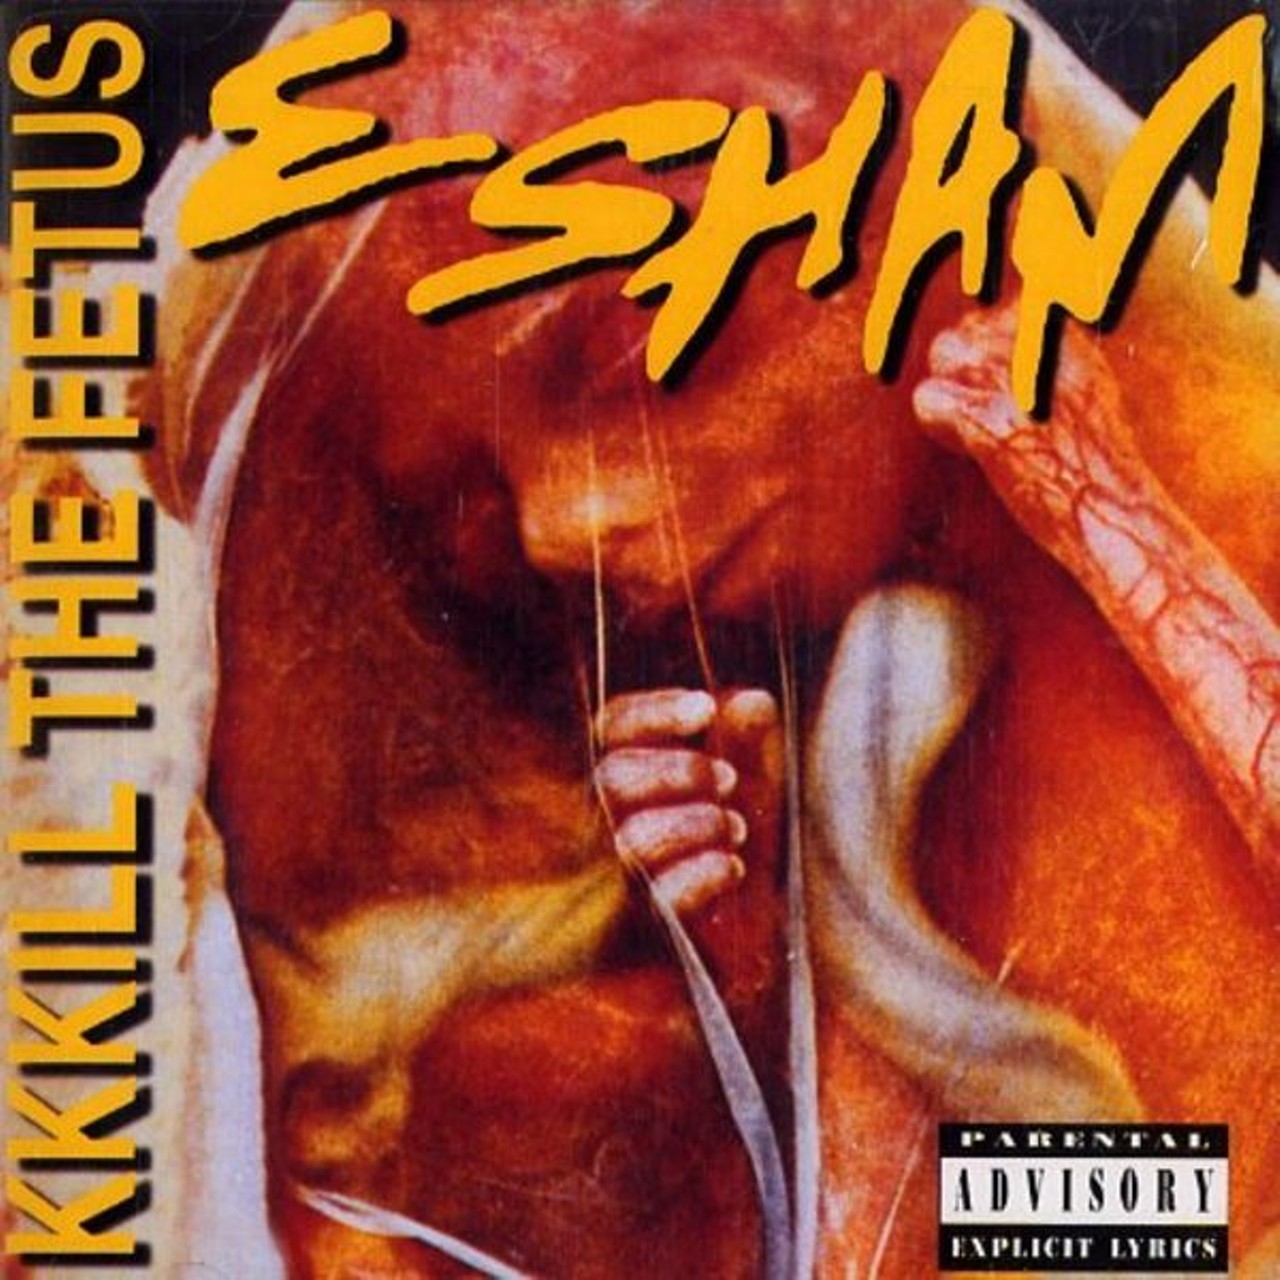 Esham
“KKKill the Fetus” 
Thanks to his psychedelic style of rapping that often centers on the subject of death, Esham is known as one of the originators of horrorcore, for better or worse. Bad taste is the norm, and this title track from his ’93 album encourages pregnant drug addicts to get an abortion rather than allow children to be raised in squalor. Hey, don’t shoot the messenger.